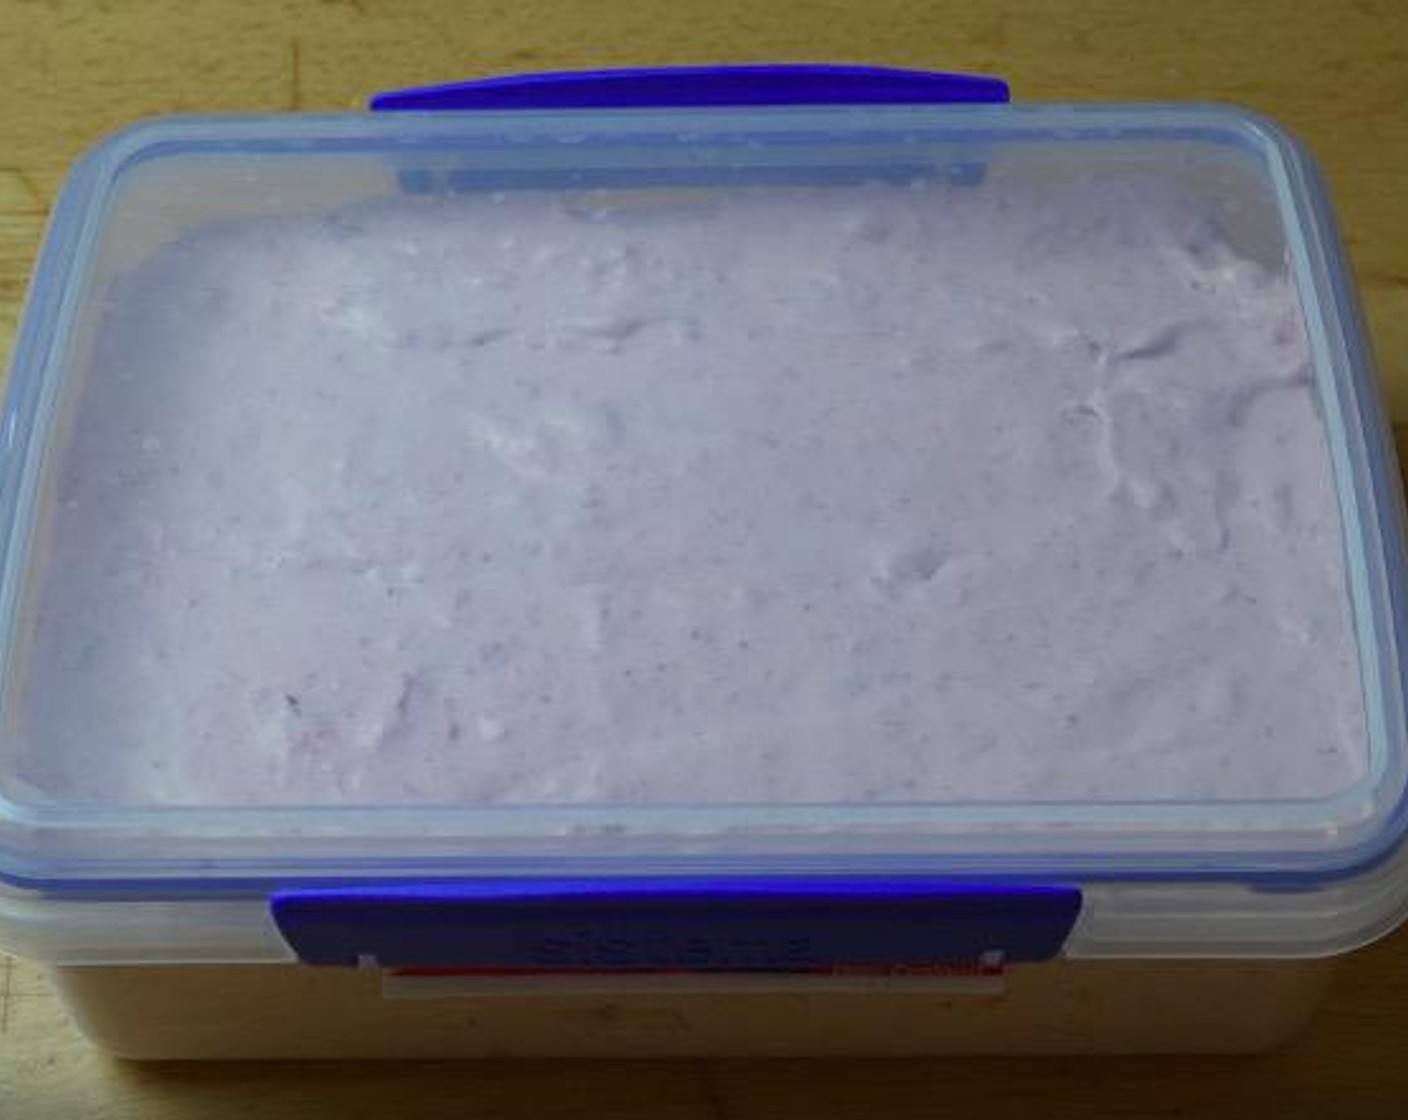 step 4 Transfer the ice cream mixture into a freezer-safe container with an airtight lid. Let it set in the freezer overnight.